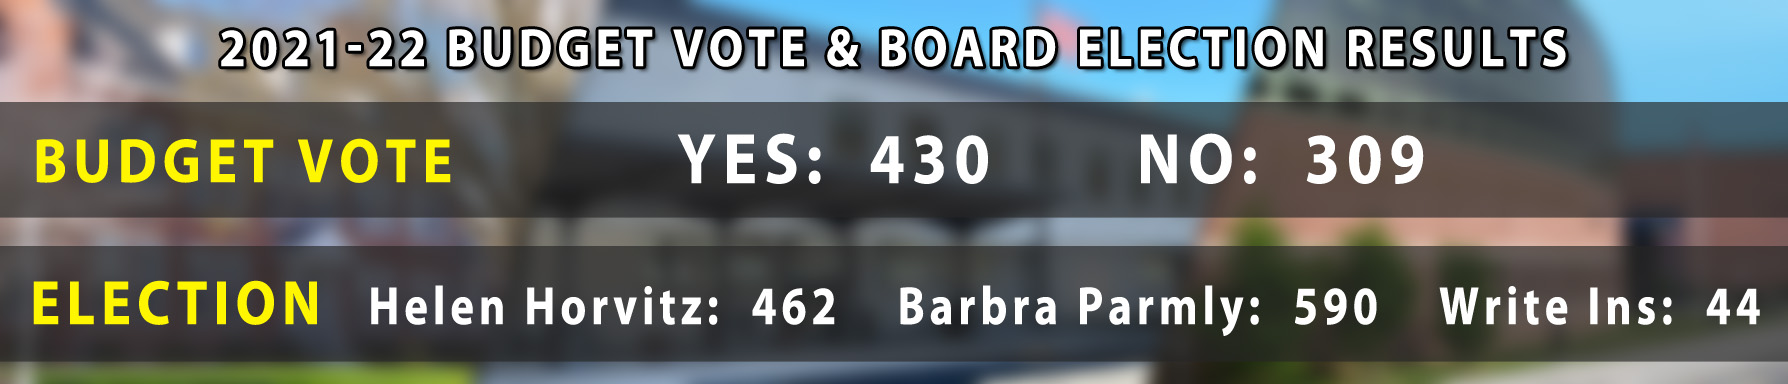 Final Totals; Yes 430 - No: 309, Electioni Results; Helen Horvitz: 462 Barbra Parmly: 590 Write Ins: 44